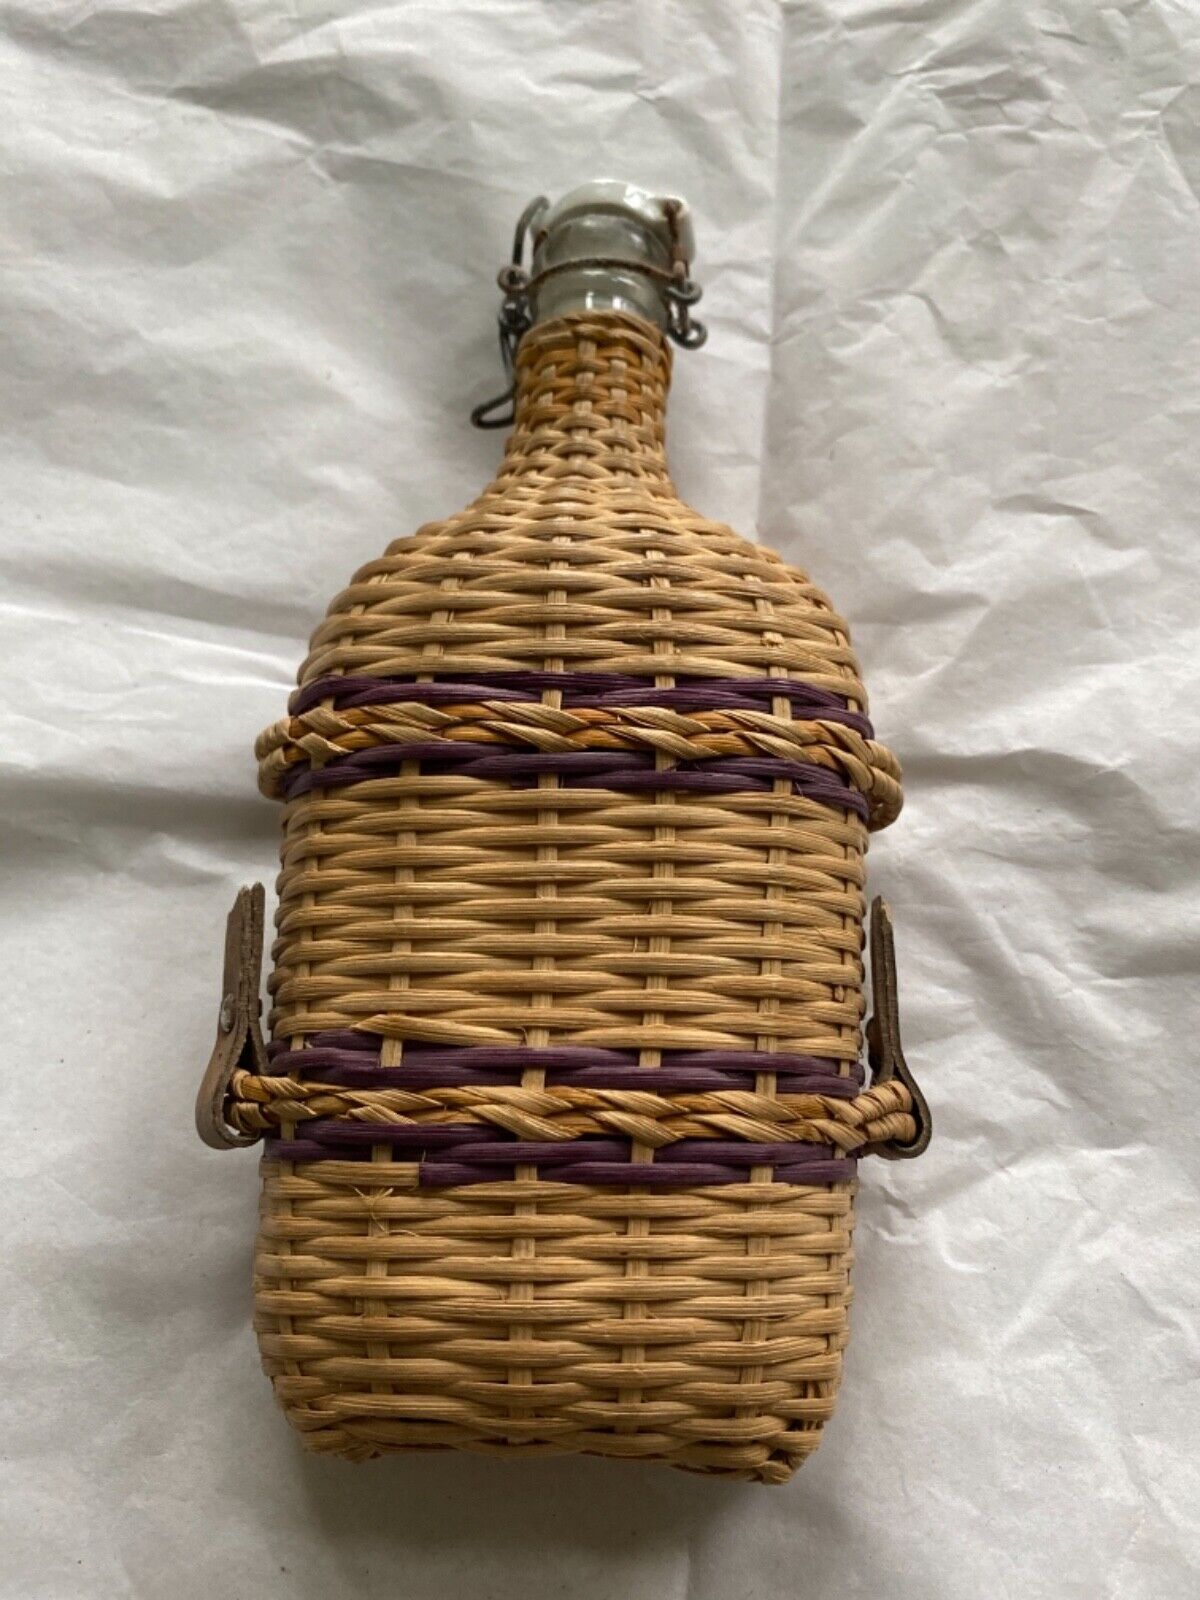 RARE UNUSUAL French Wicker Wrapped Glass Holy Water Bottle from Lourdes France